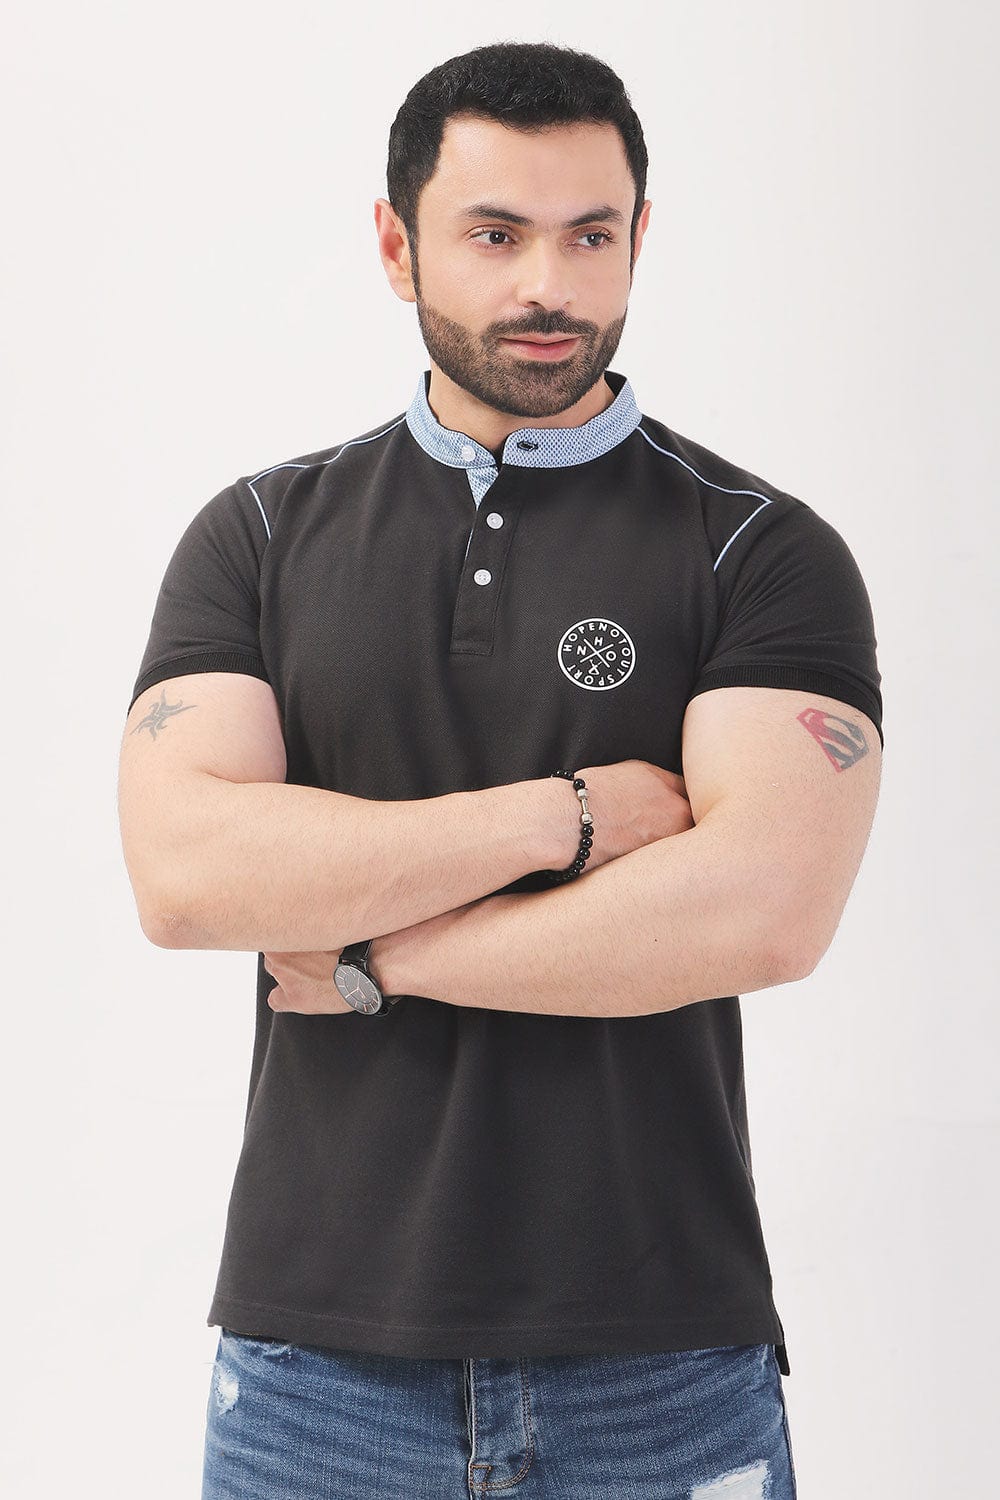 Hope Not Out by Shahid Afridi Men Polo Shirt Premium Ban Polo with Contrast Collar